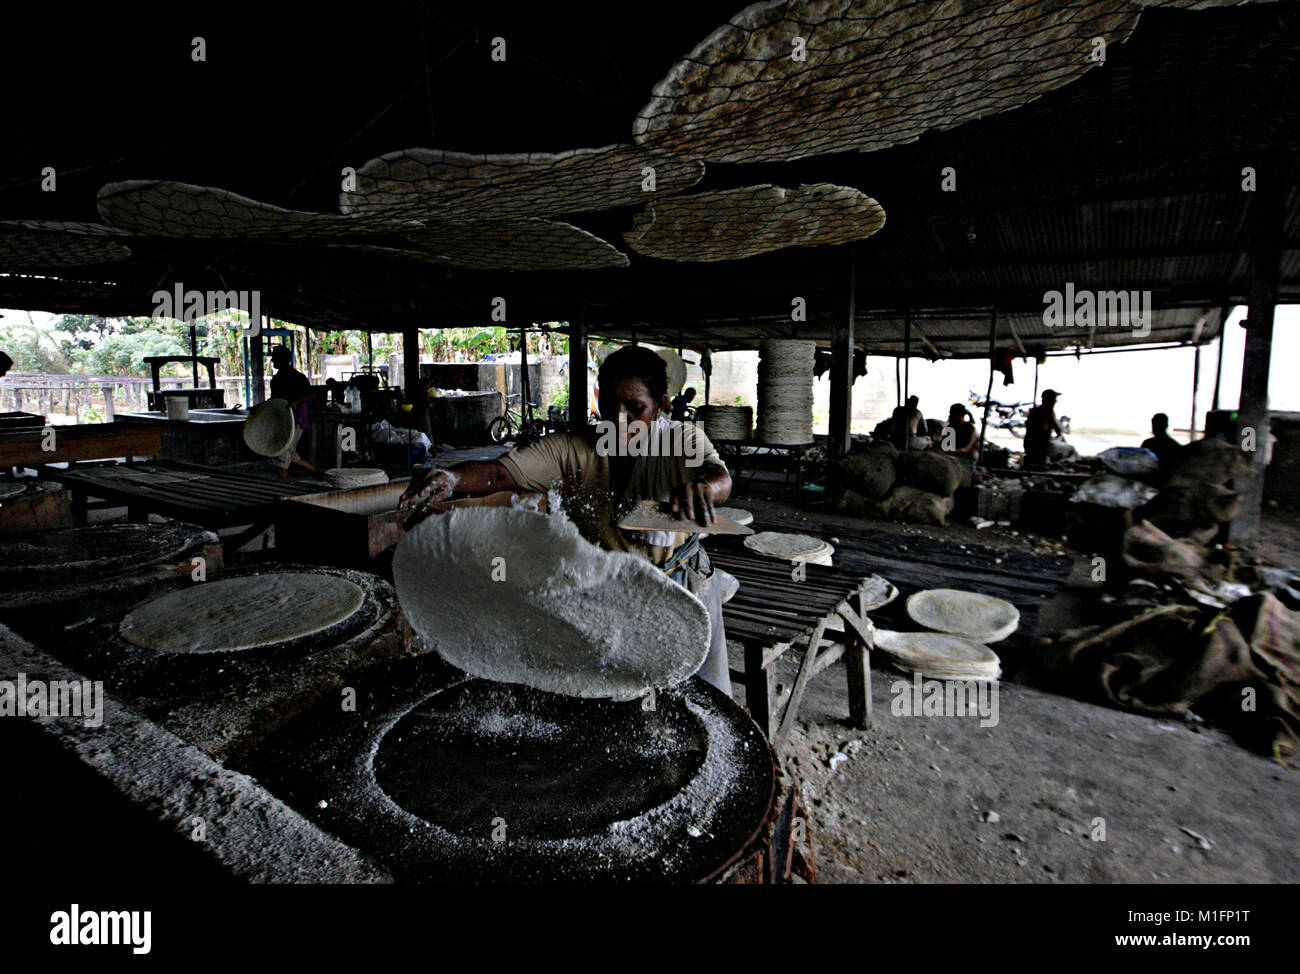 December 8, 2012 - Maturin, Monagas, Venezuela - december 09, 2012.  Tenderers start the cooking of the cakes in the budares.The casabe or cazabe is part of the tradition of the Venezuelan as its indigenous people elaborated it and it is known as the Venezuelan bread. In the city of Maturâ€™n, Monagas state. Venezuela .foto: Juan Carlos Hernandez (Credit Image: © Juan Carlos Hernandez via ZUMA Wire) Stock Photo